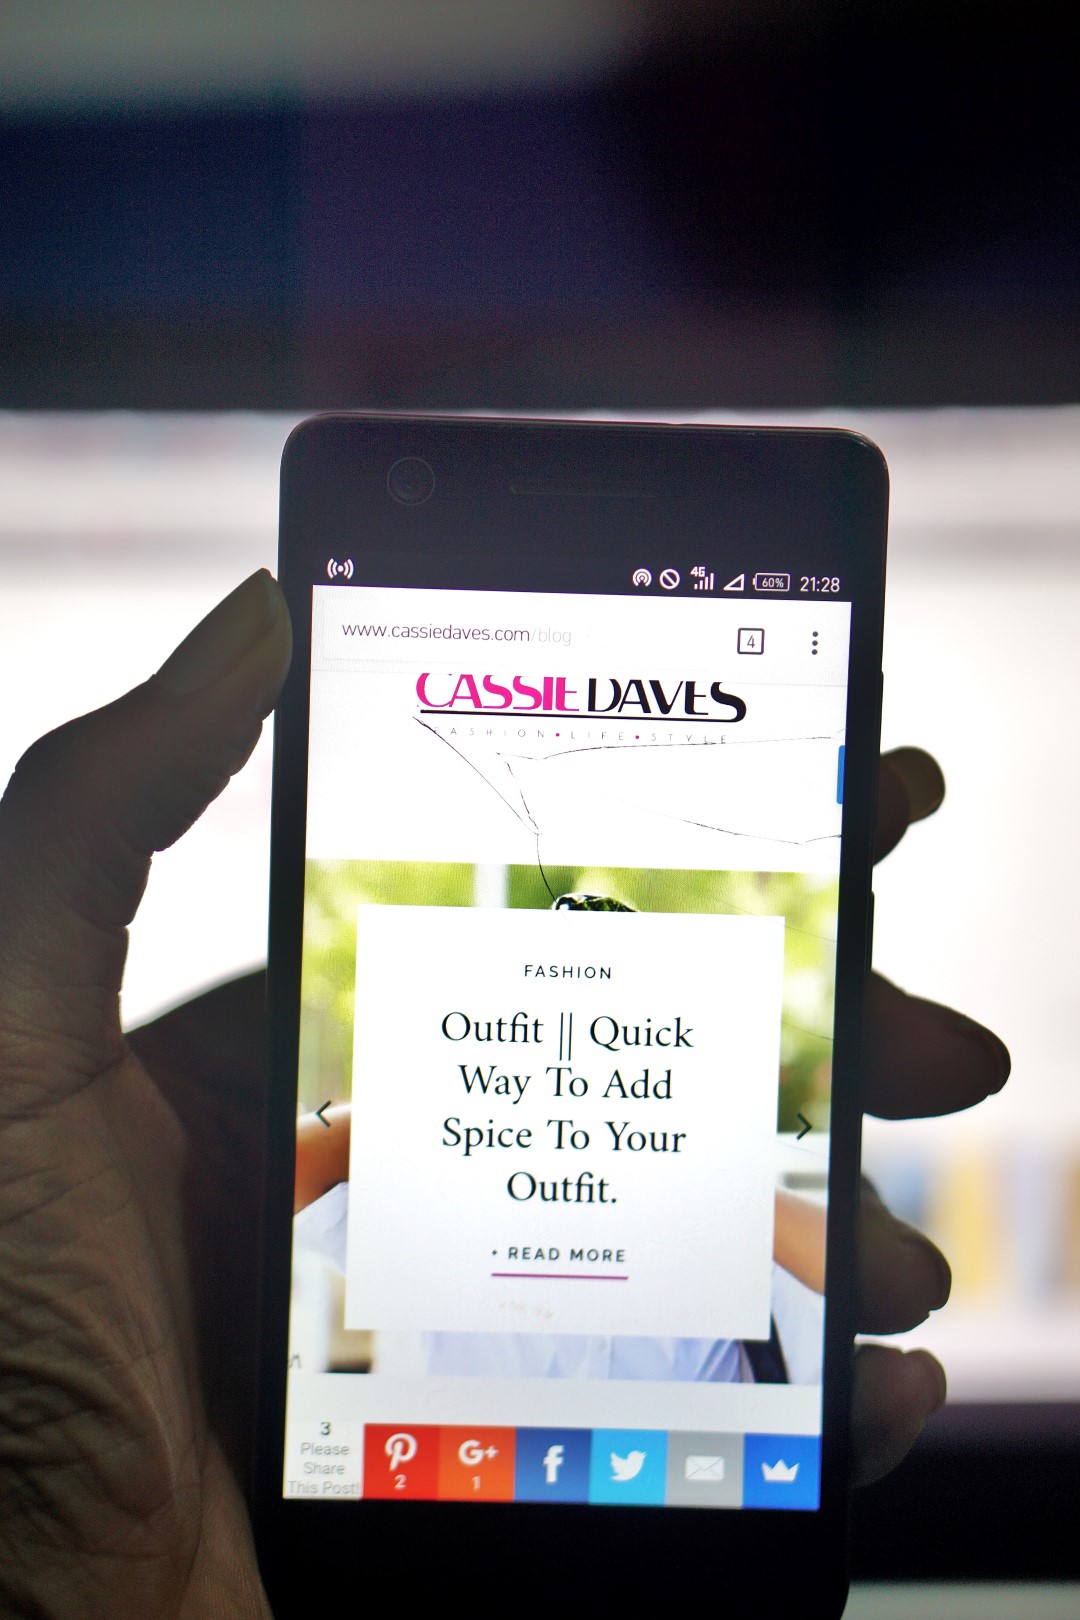 Picture of a phone showing the cassie daves blog home page